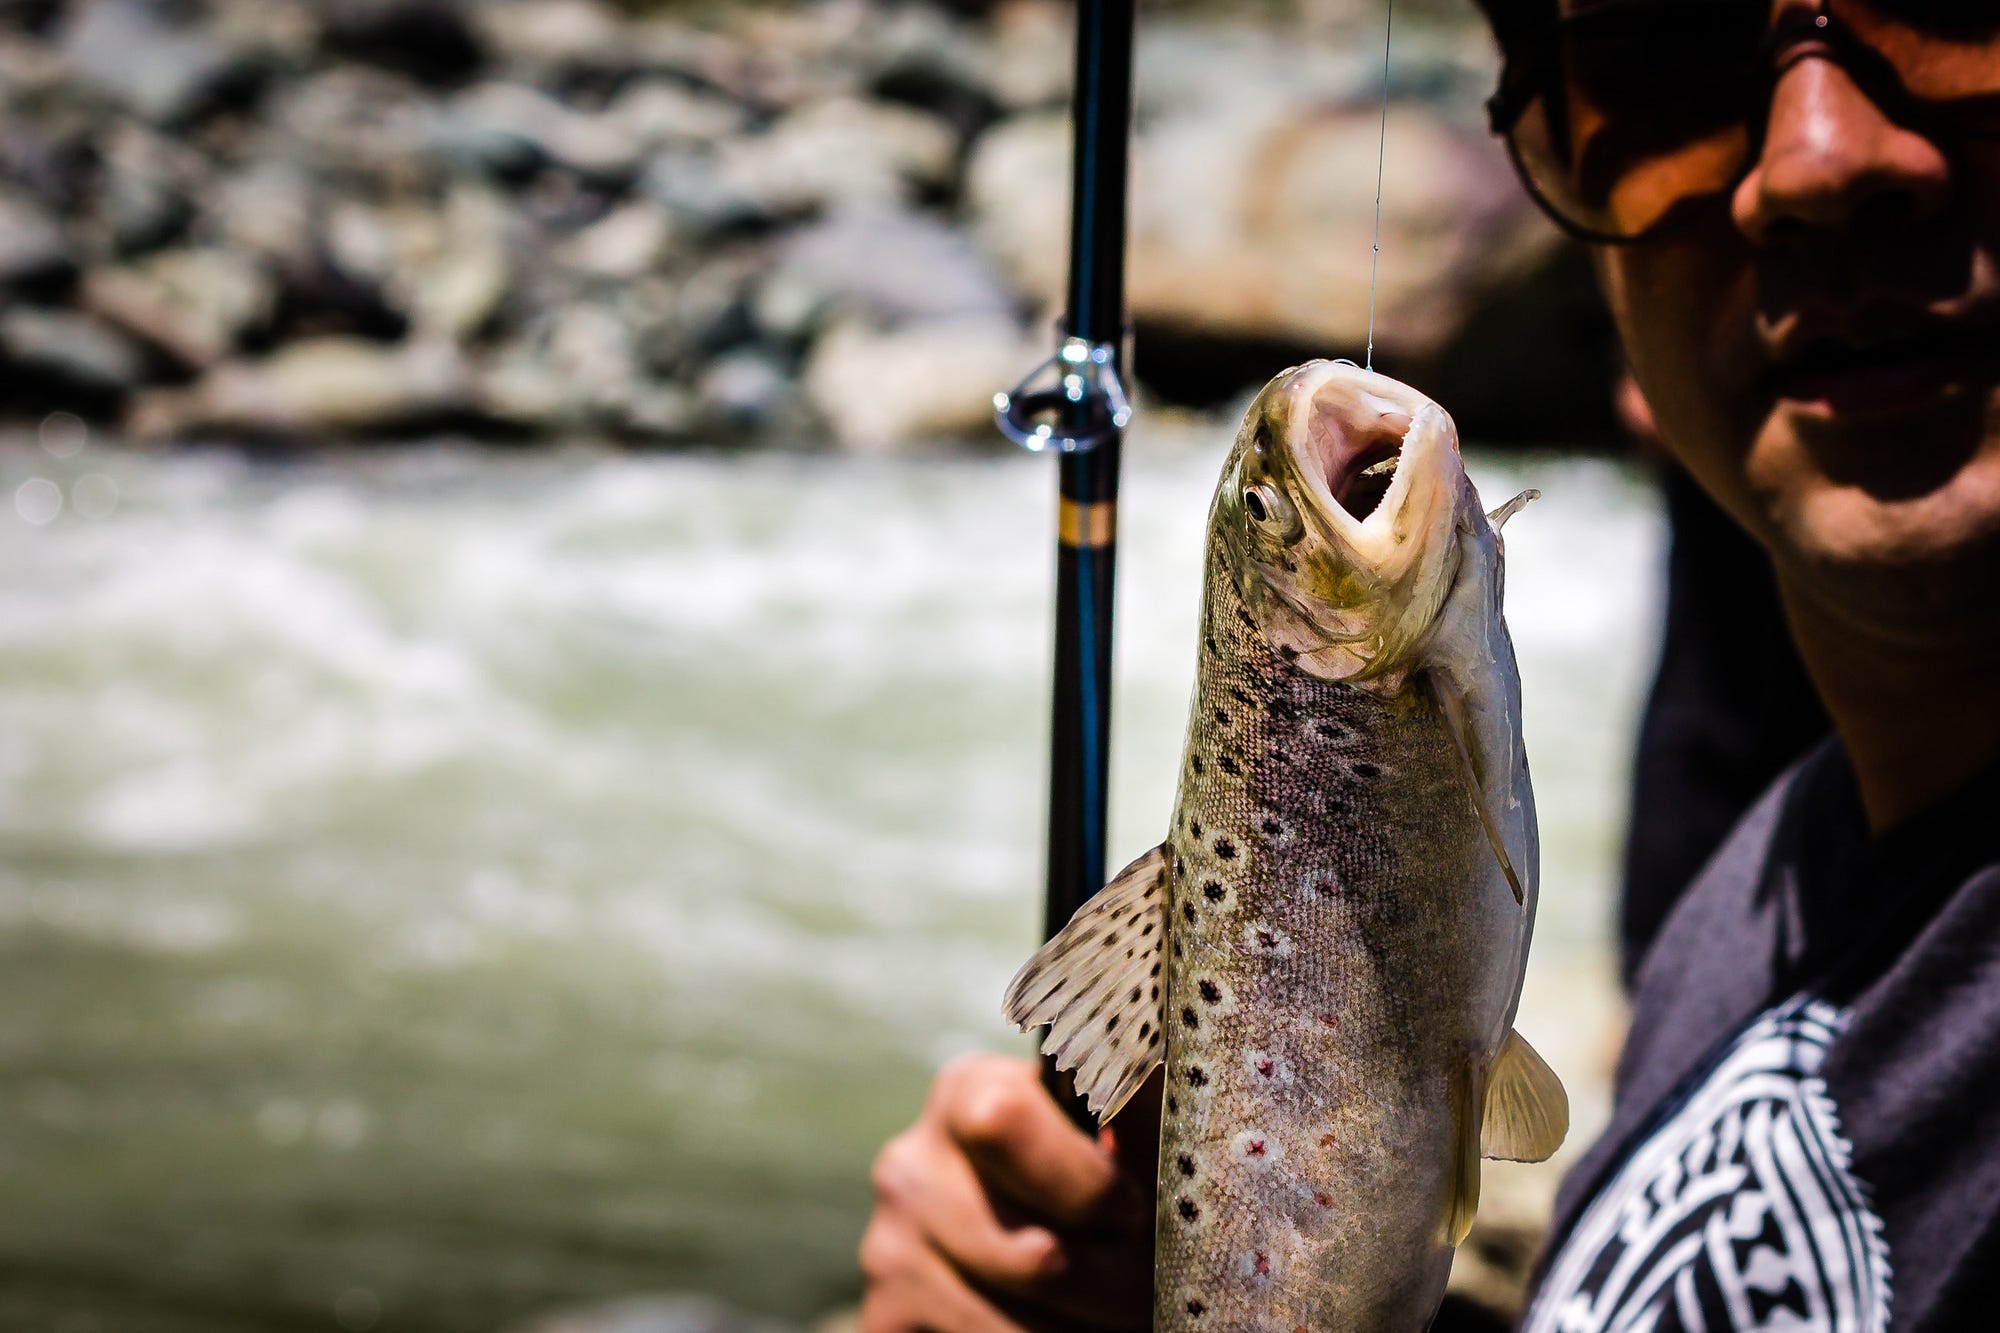 Trout fishing in Kashmir. A story about food, tourism, death and hope., by  Brad A Johnson